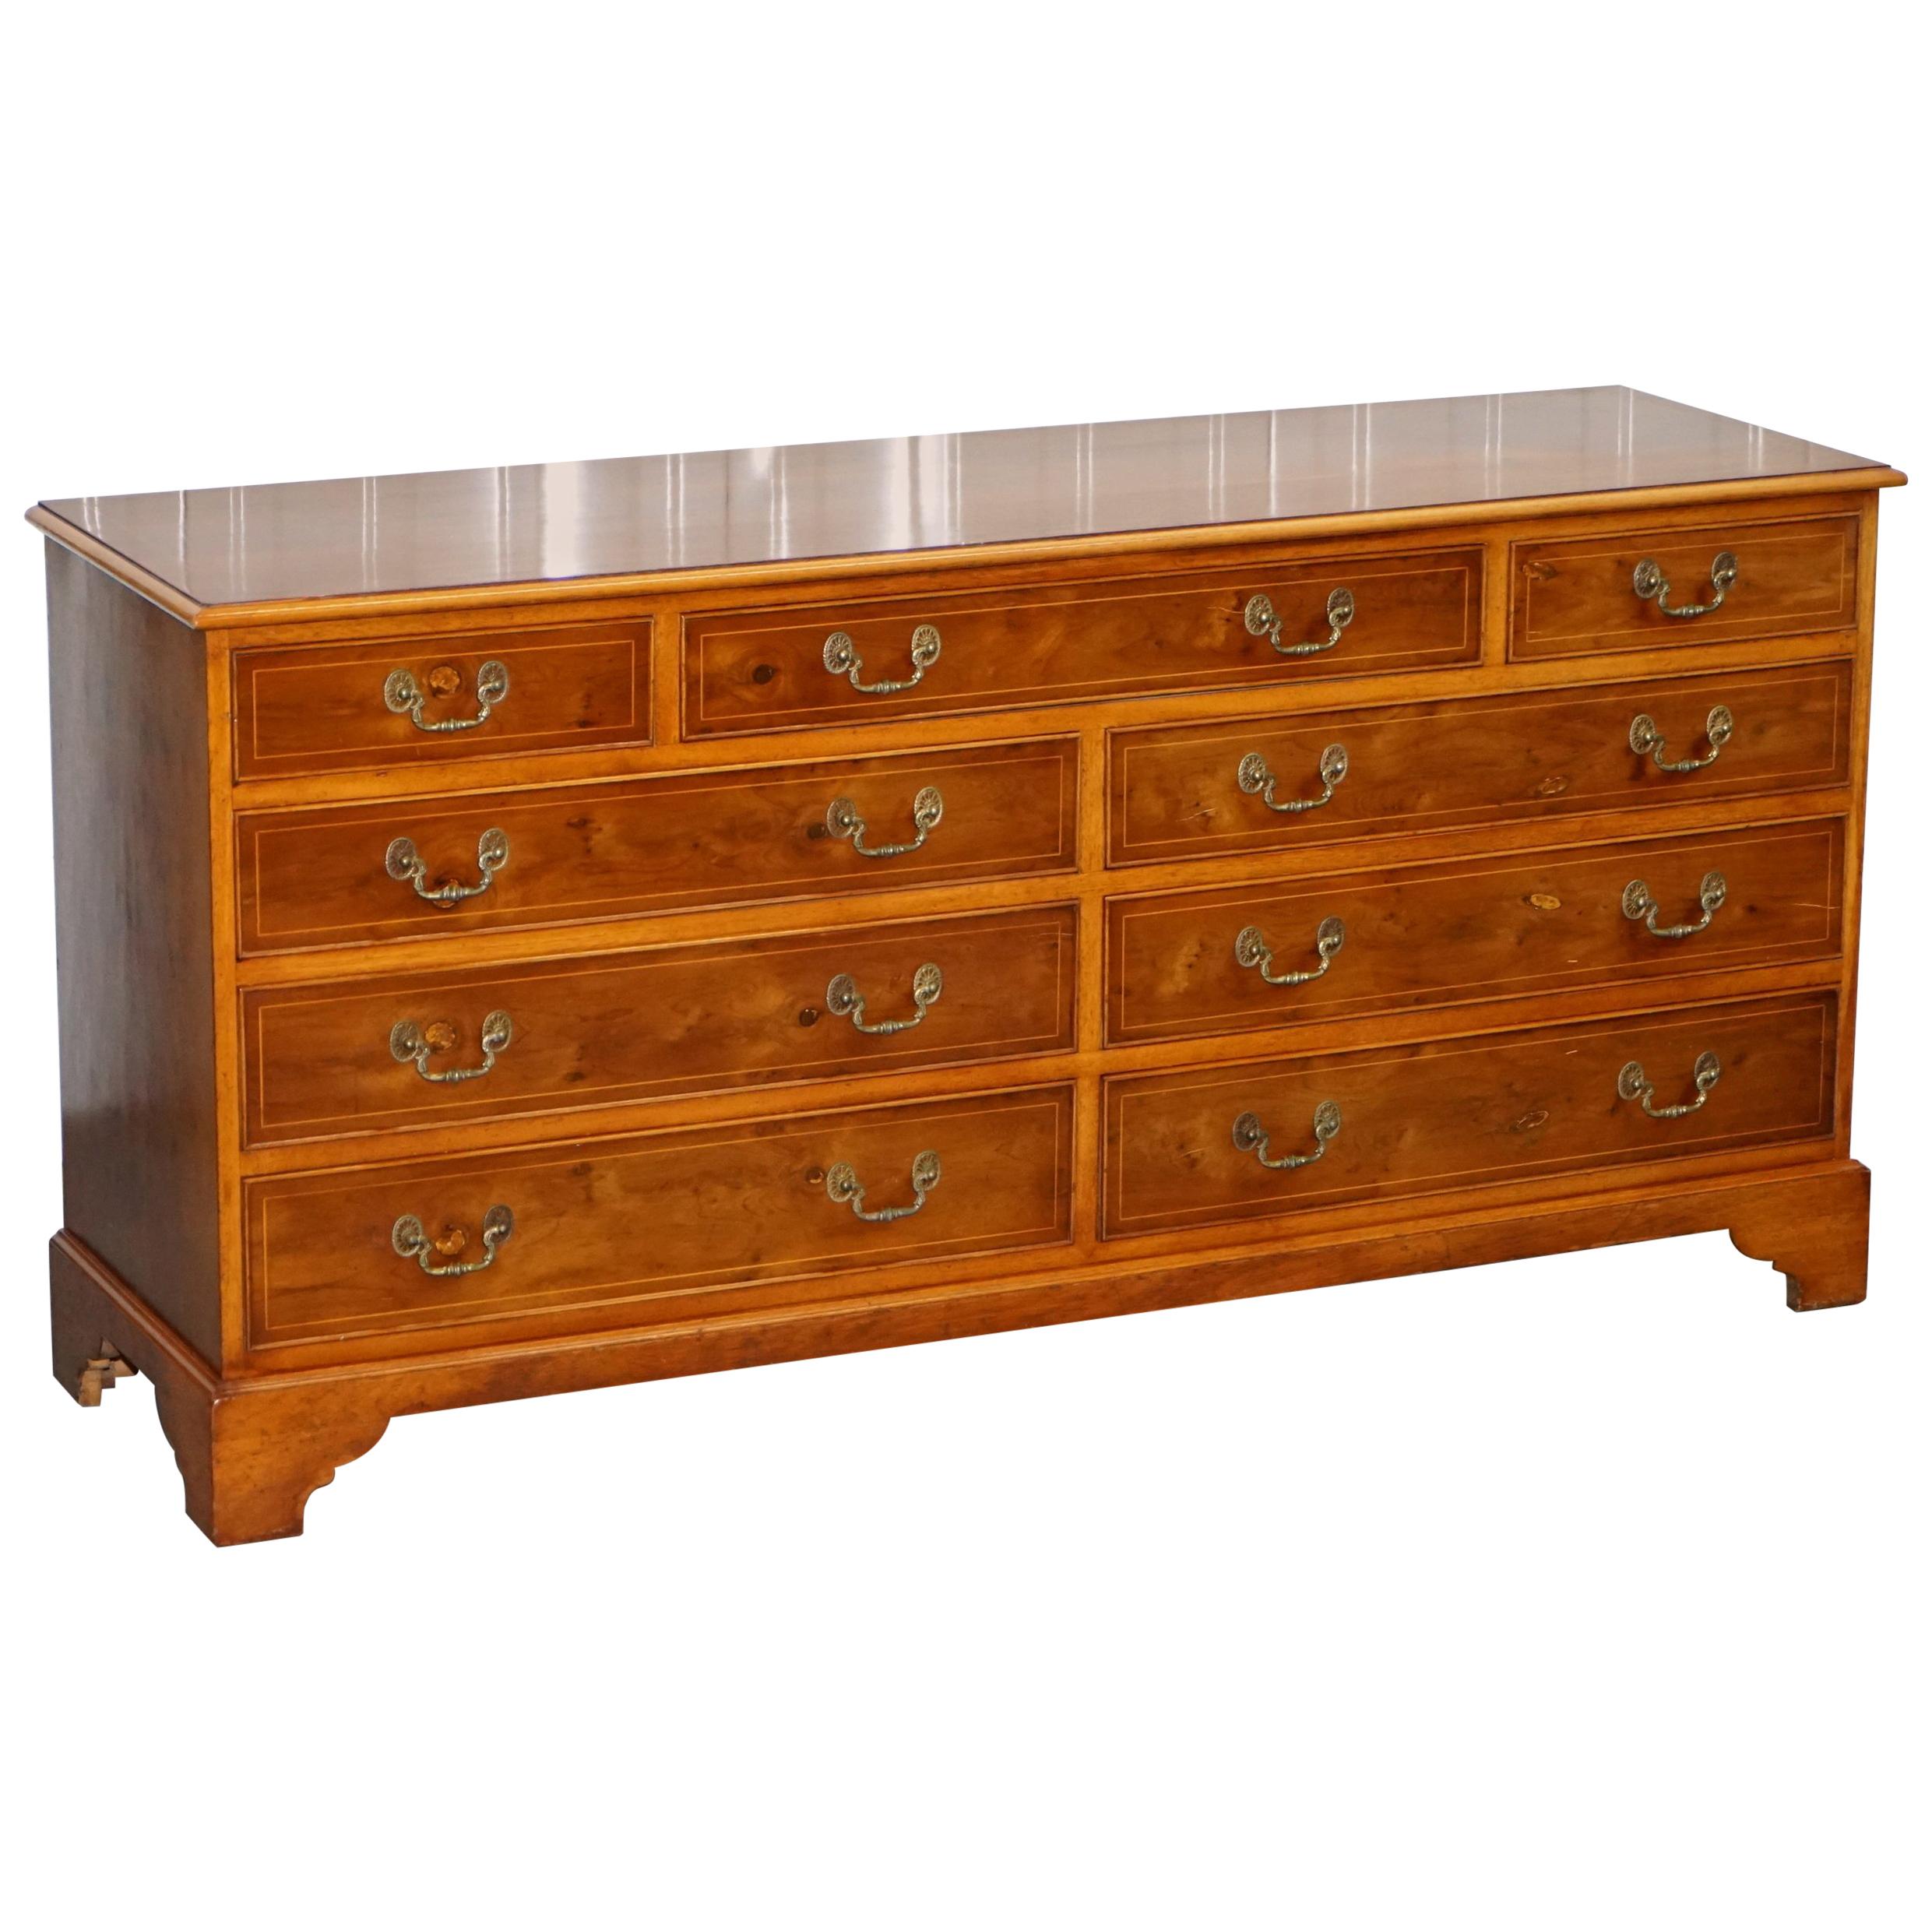 Vintage Burr Yew Wood Large Sideboard Bank of Drawers Campaign Style, England